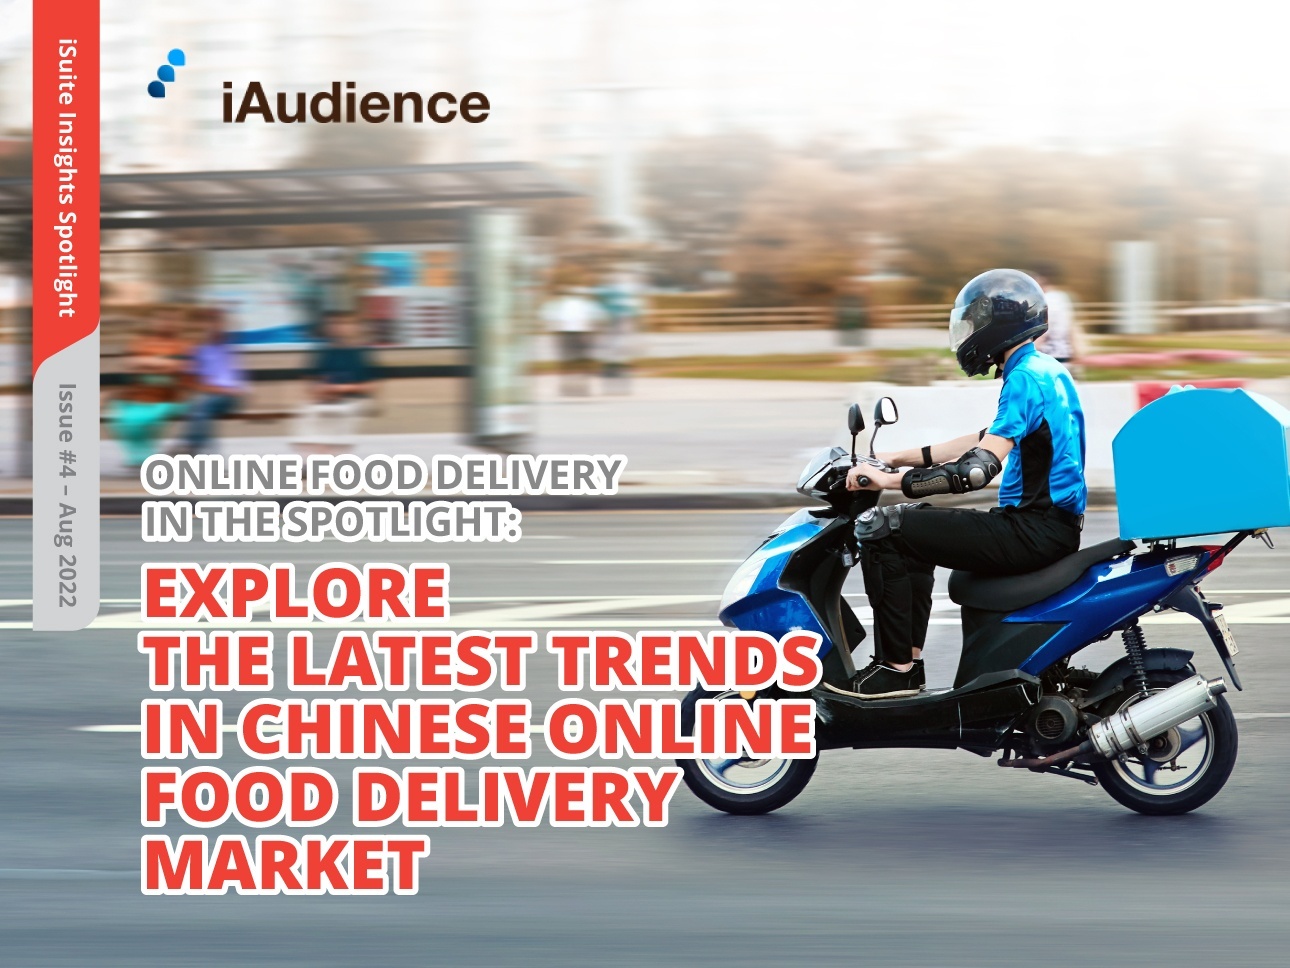 iSuite Insights Spotlight – Issue #4  Explore the Latest Trends in Chinese Online Food Delivery Through iAudience